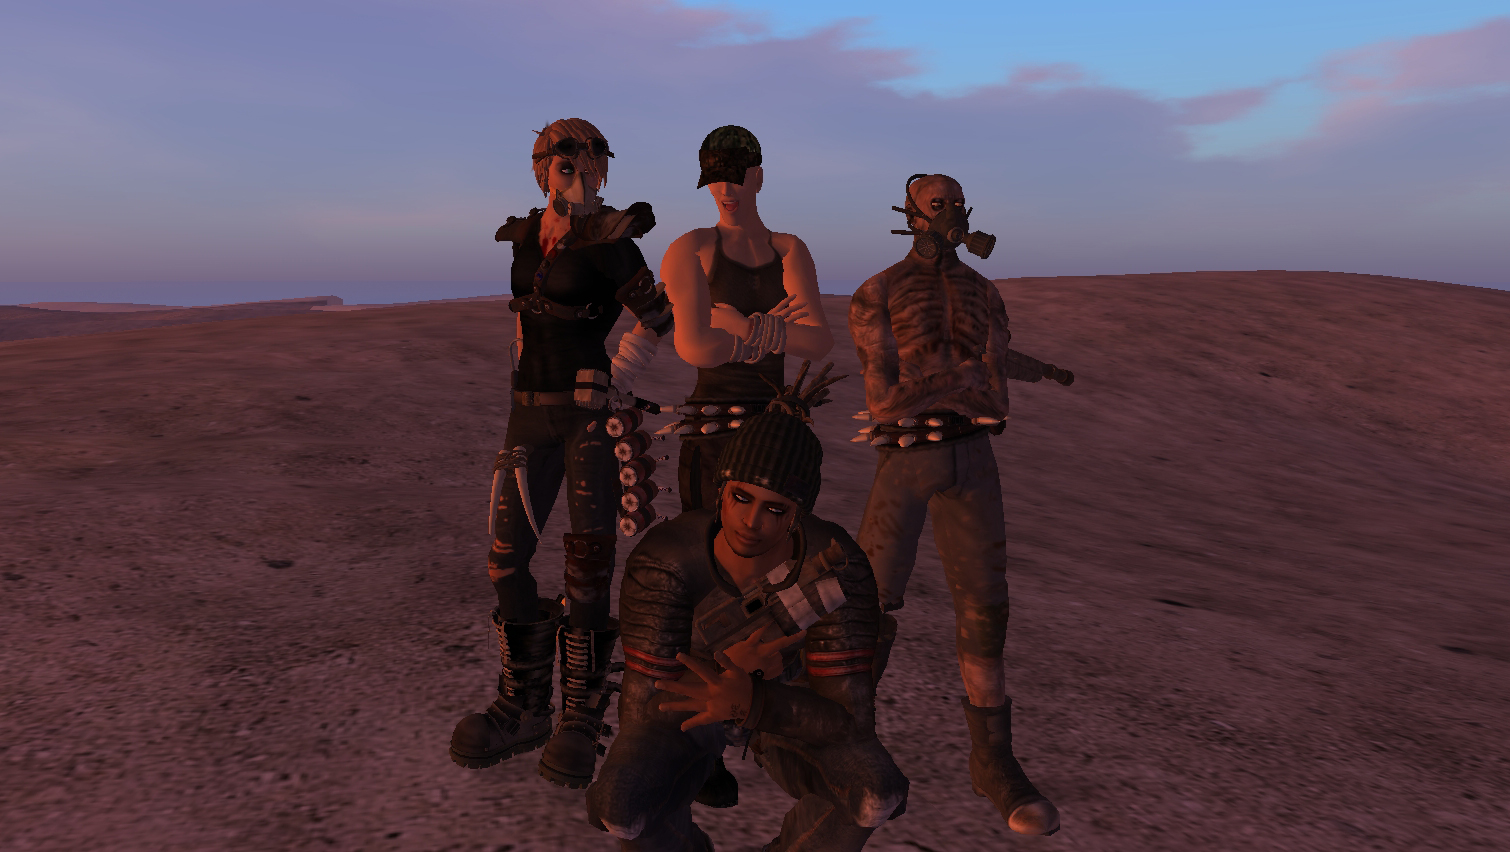 Team 1: Robin (front-center), Vexx, Psycho, Pirate (rear-l to r)